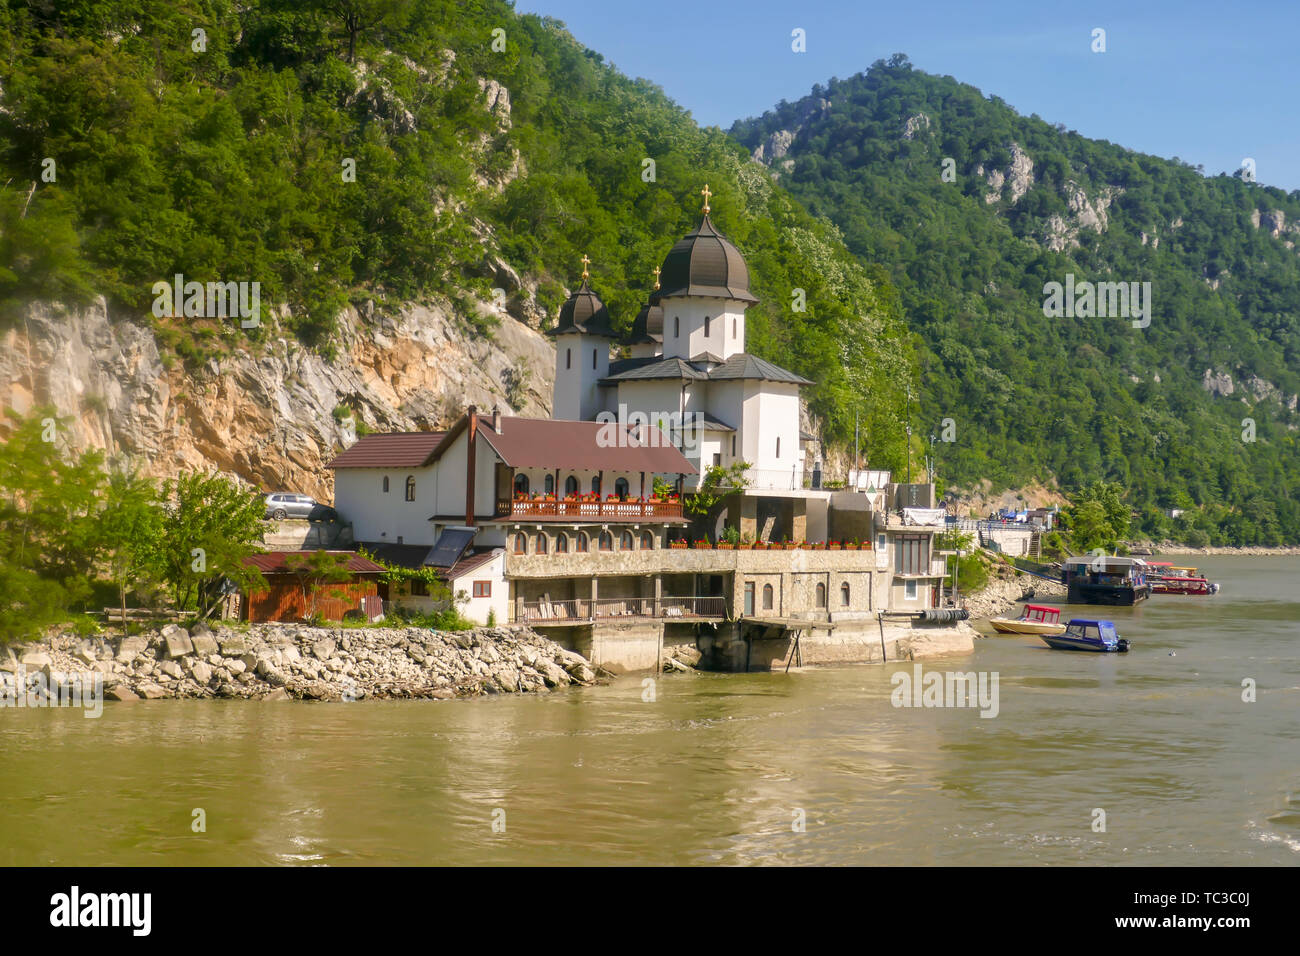 Mraconia Monastery on banks of  the Iron Gate gorges on the Danube River between Serbia and Romania. Stock Photo